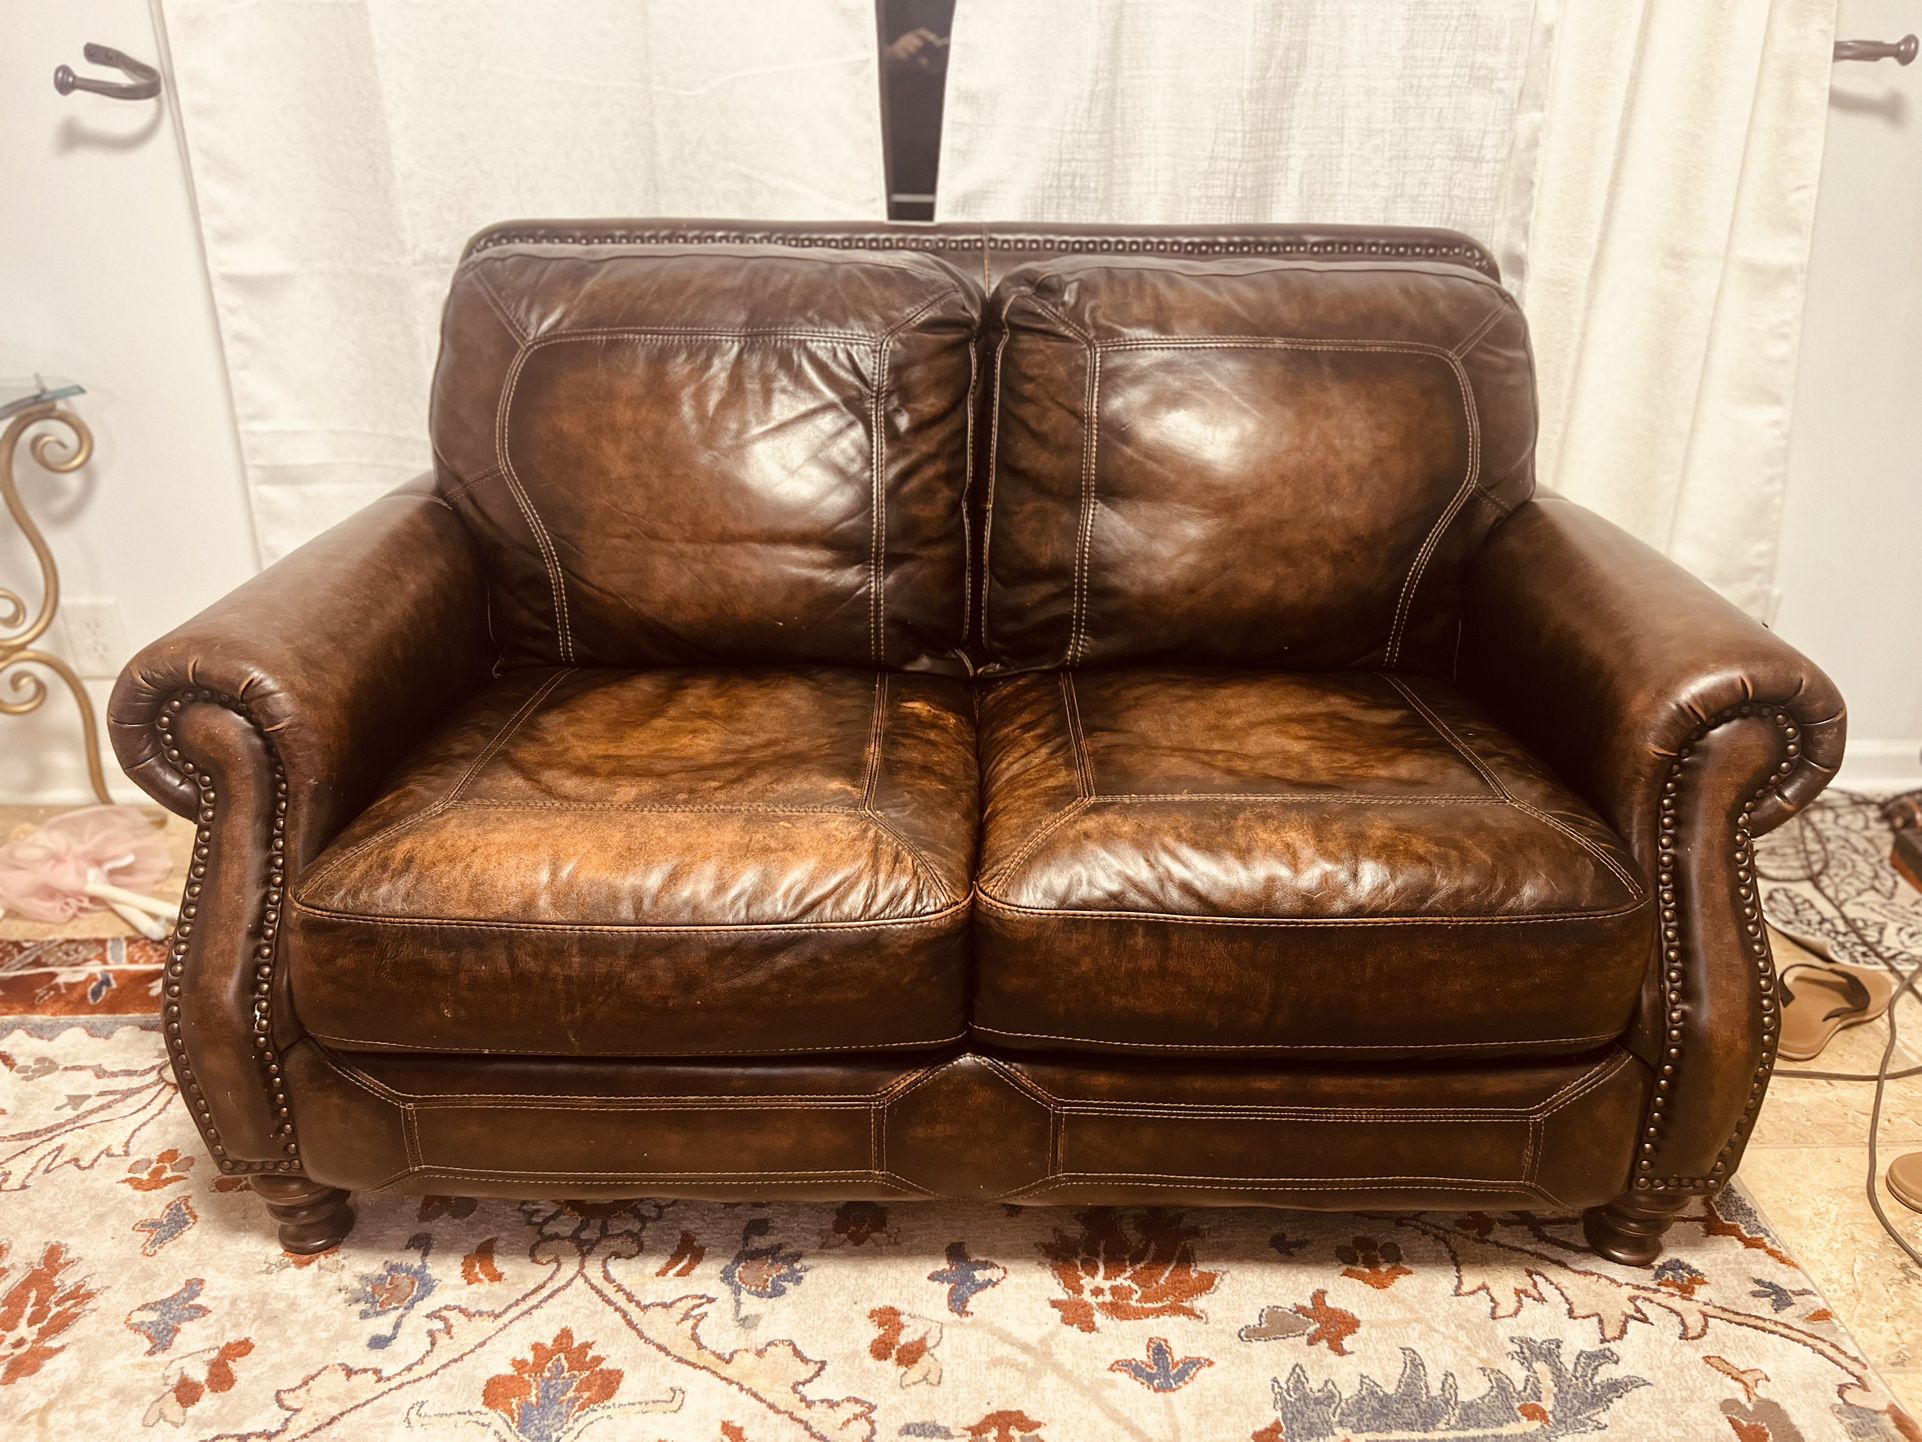 Charlie Leather Loveseat